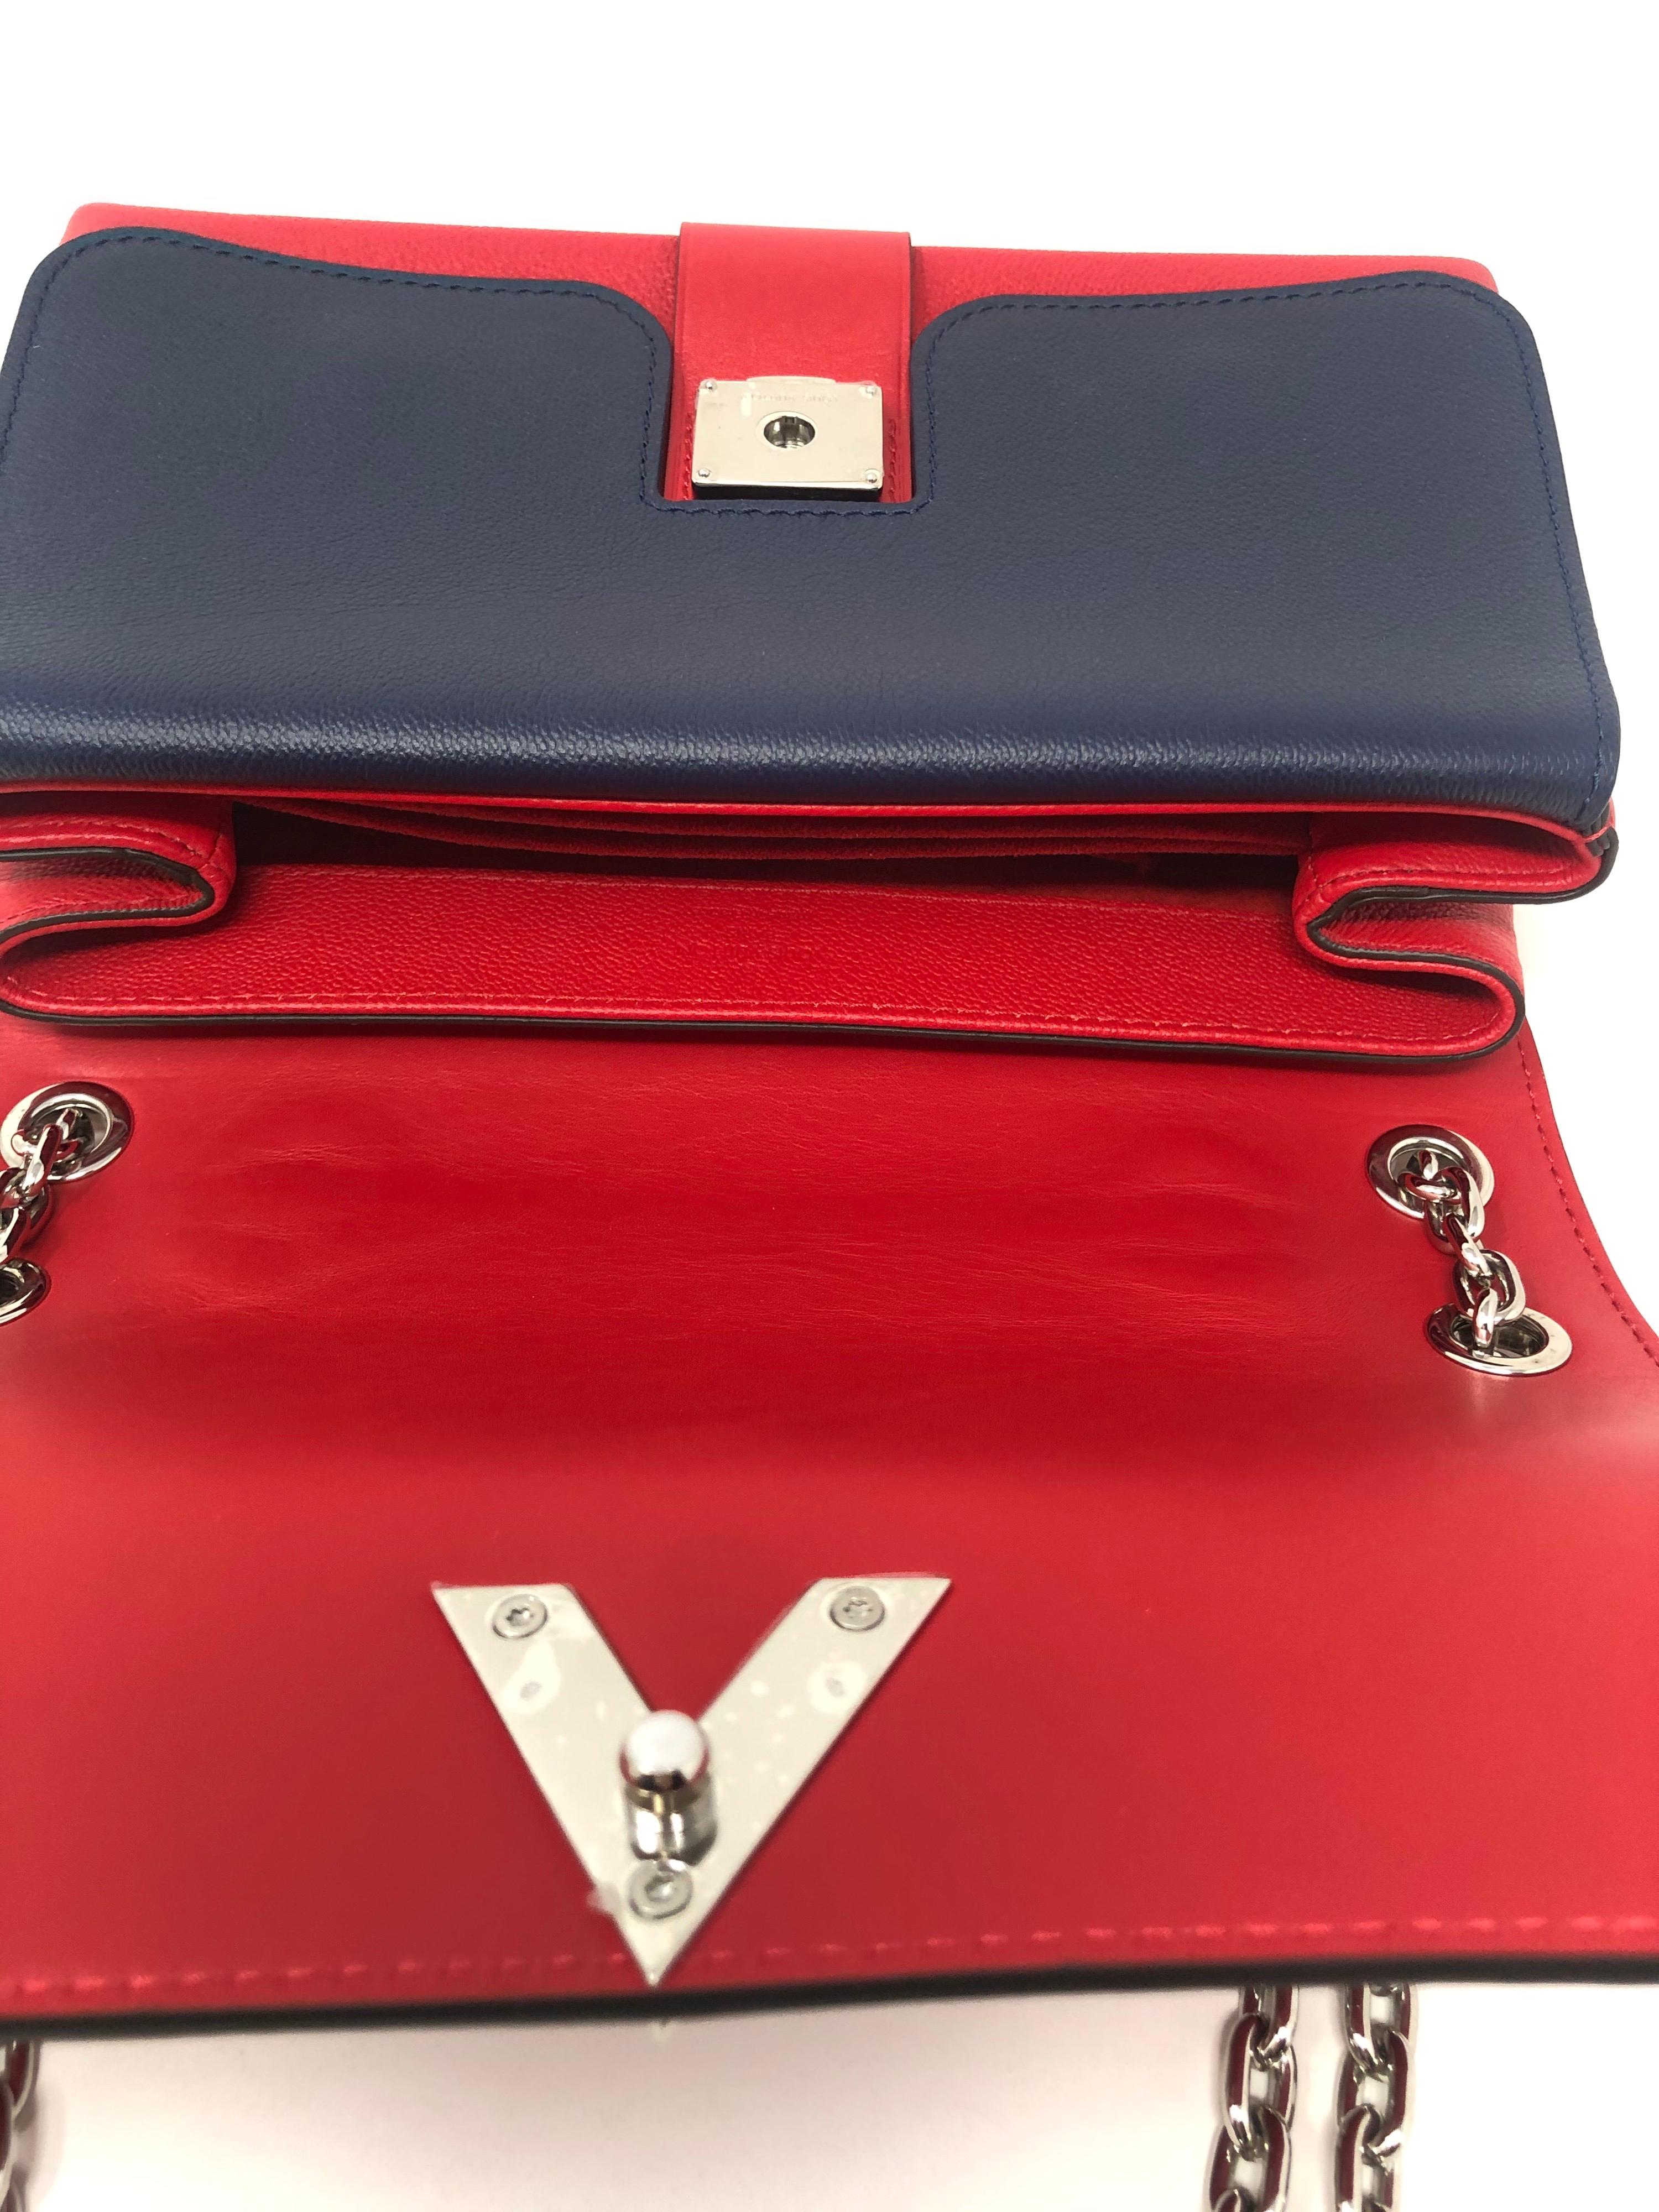 Louis Vuitton Limited Edition Red and Navy Crossbody Bag 4